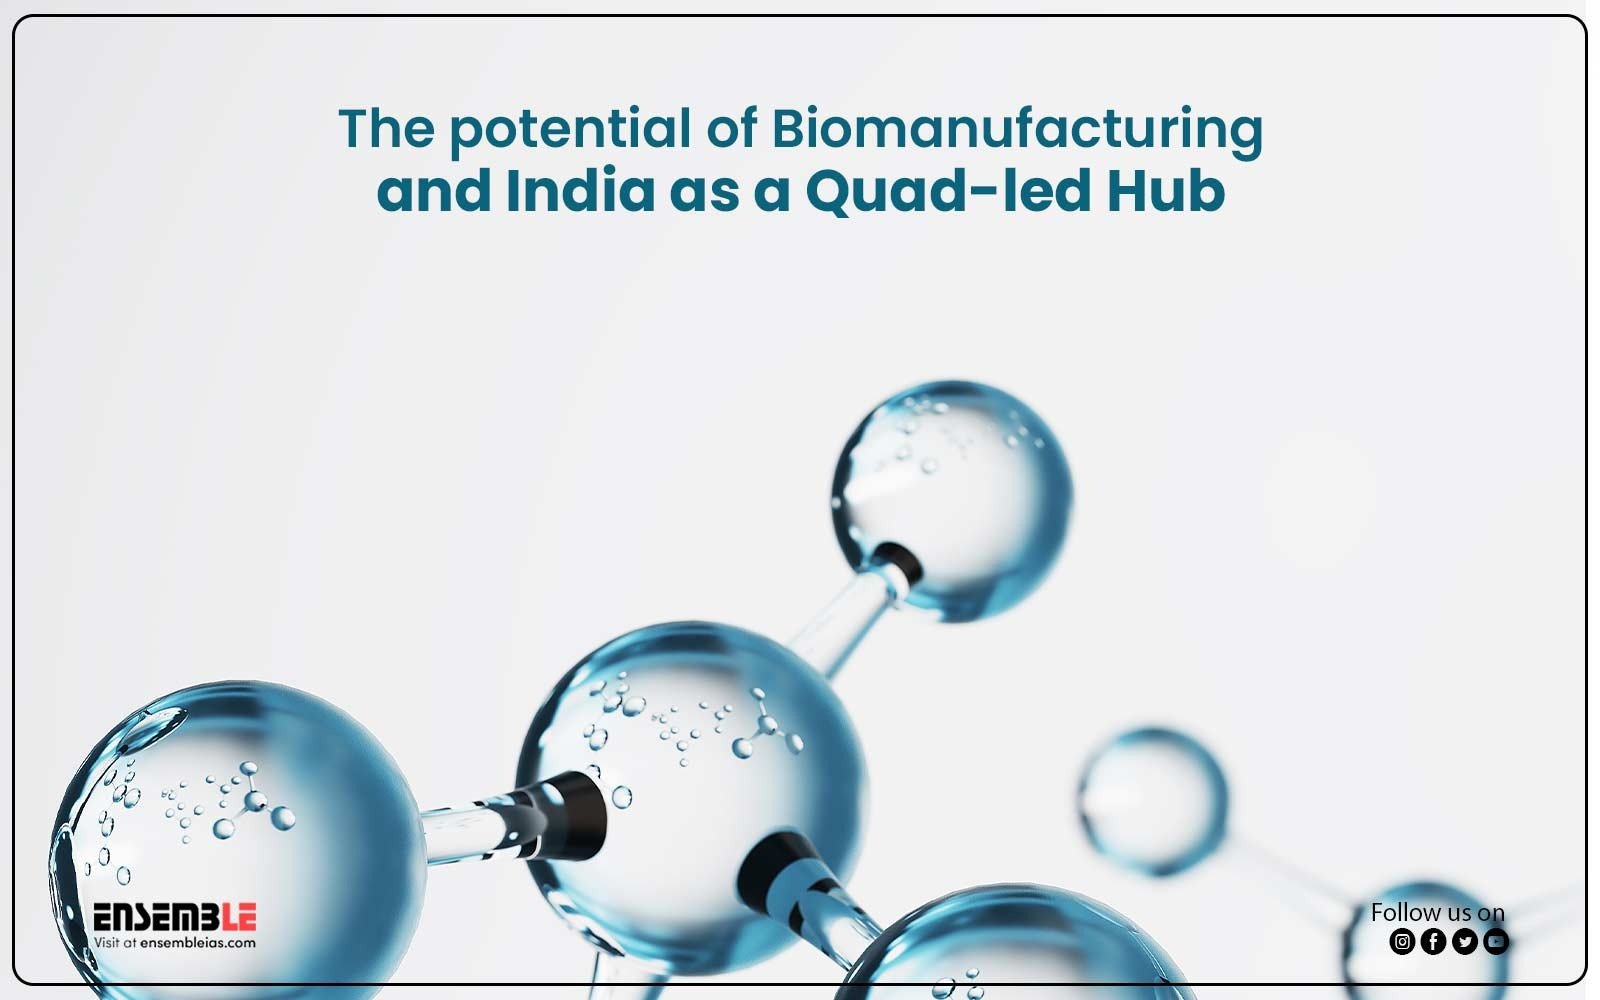 The potential of Biomanufacturing and India as a Quad-led Hub